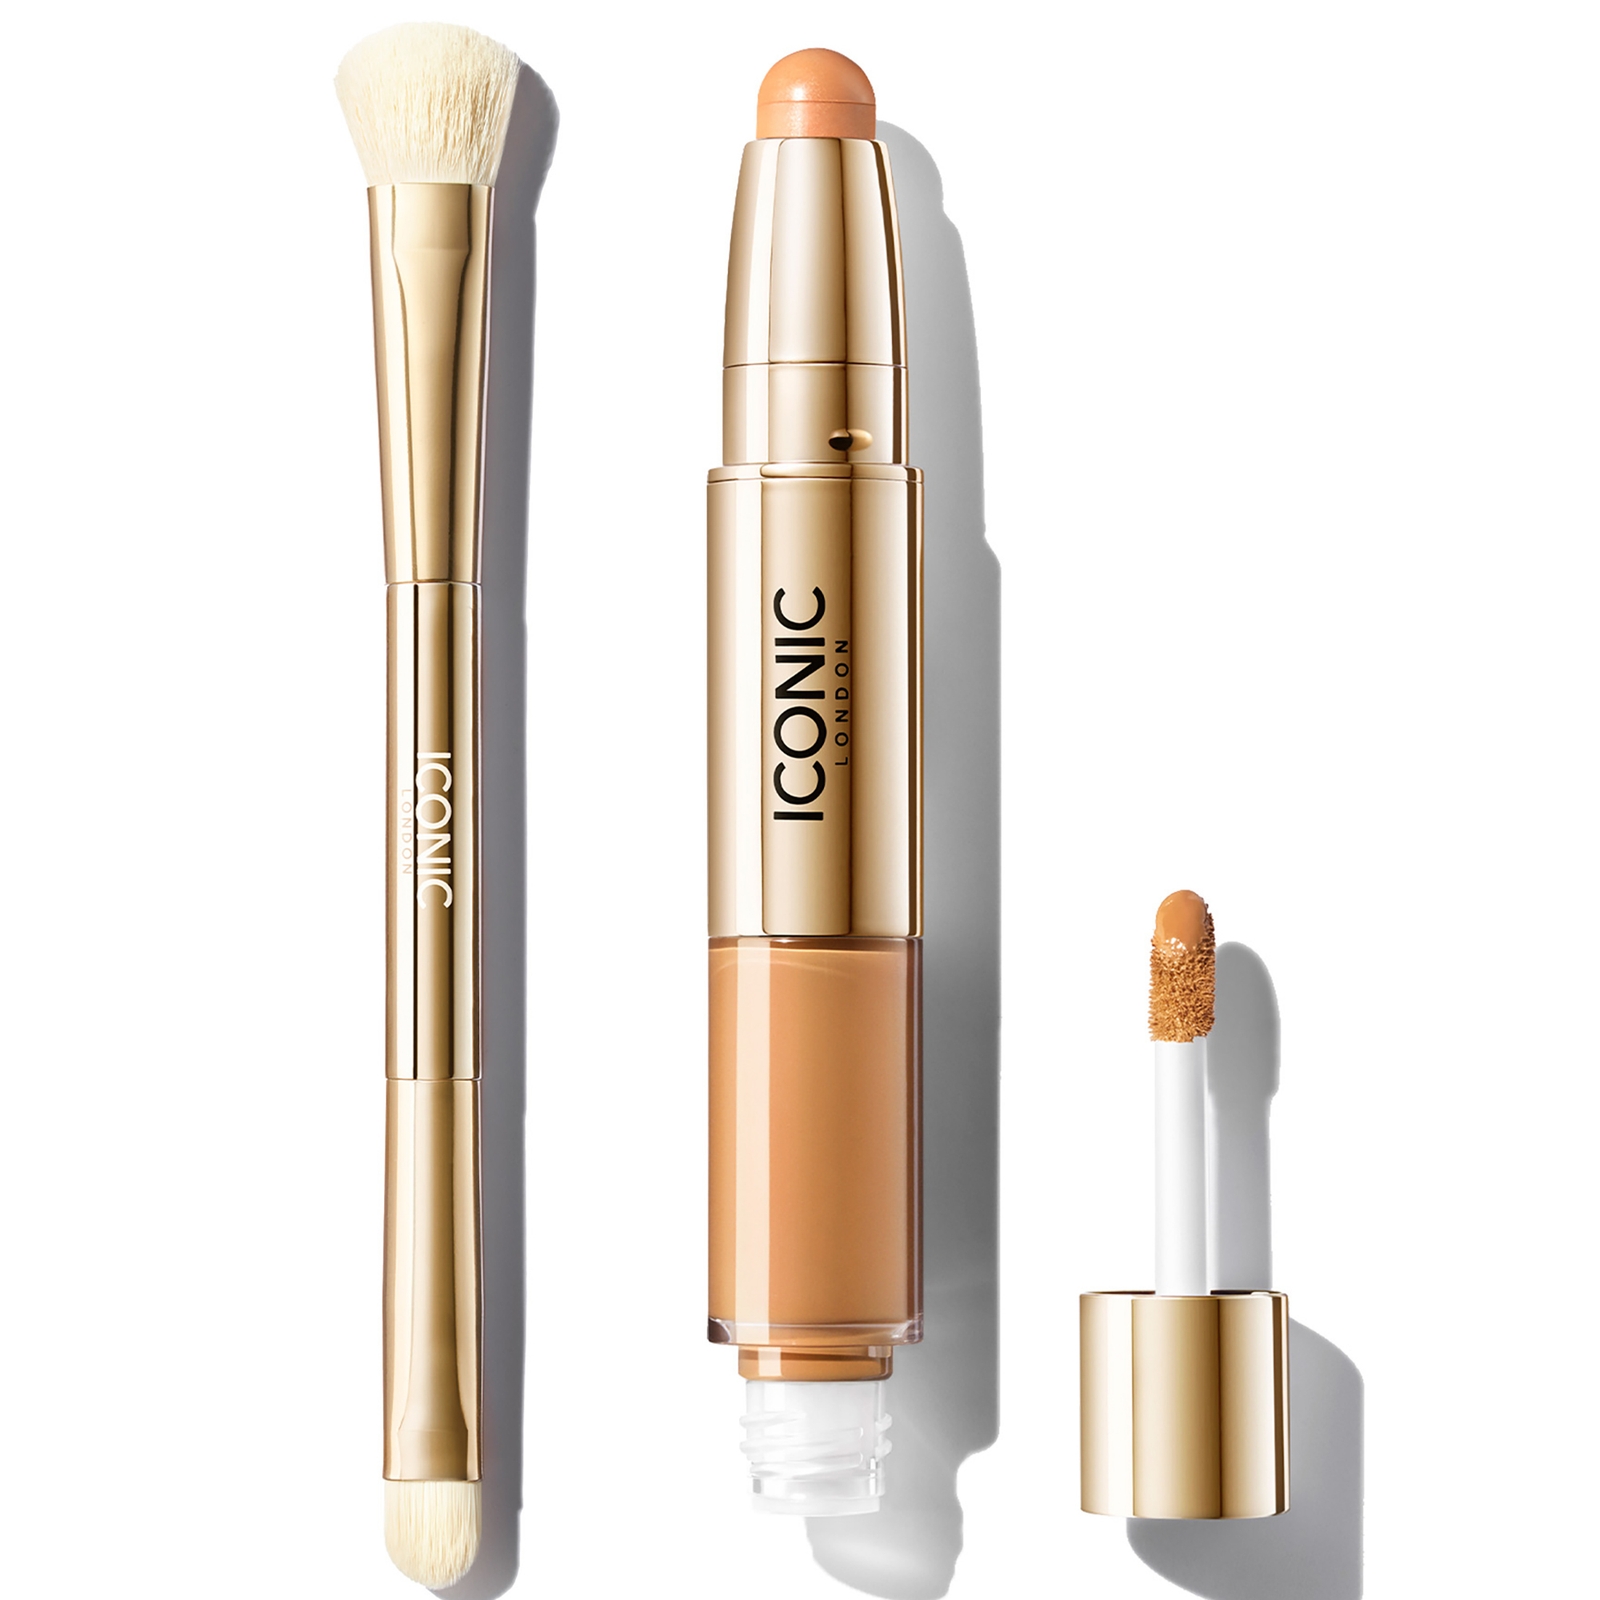 Iconic London Radiant Concealer And Brush Bundle (various Shades) - Golden Tan